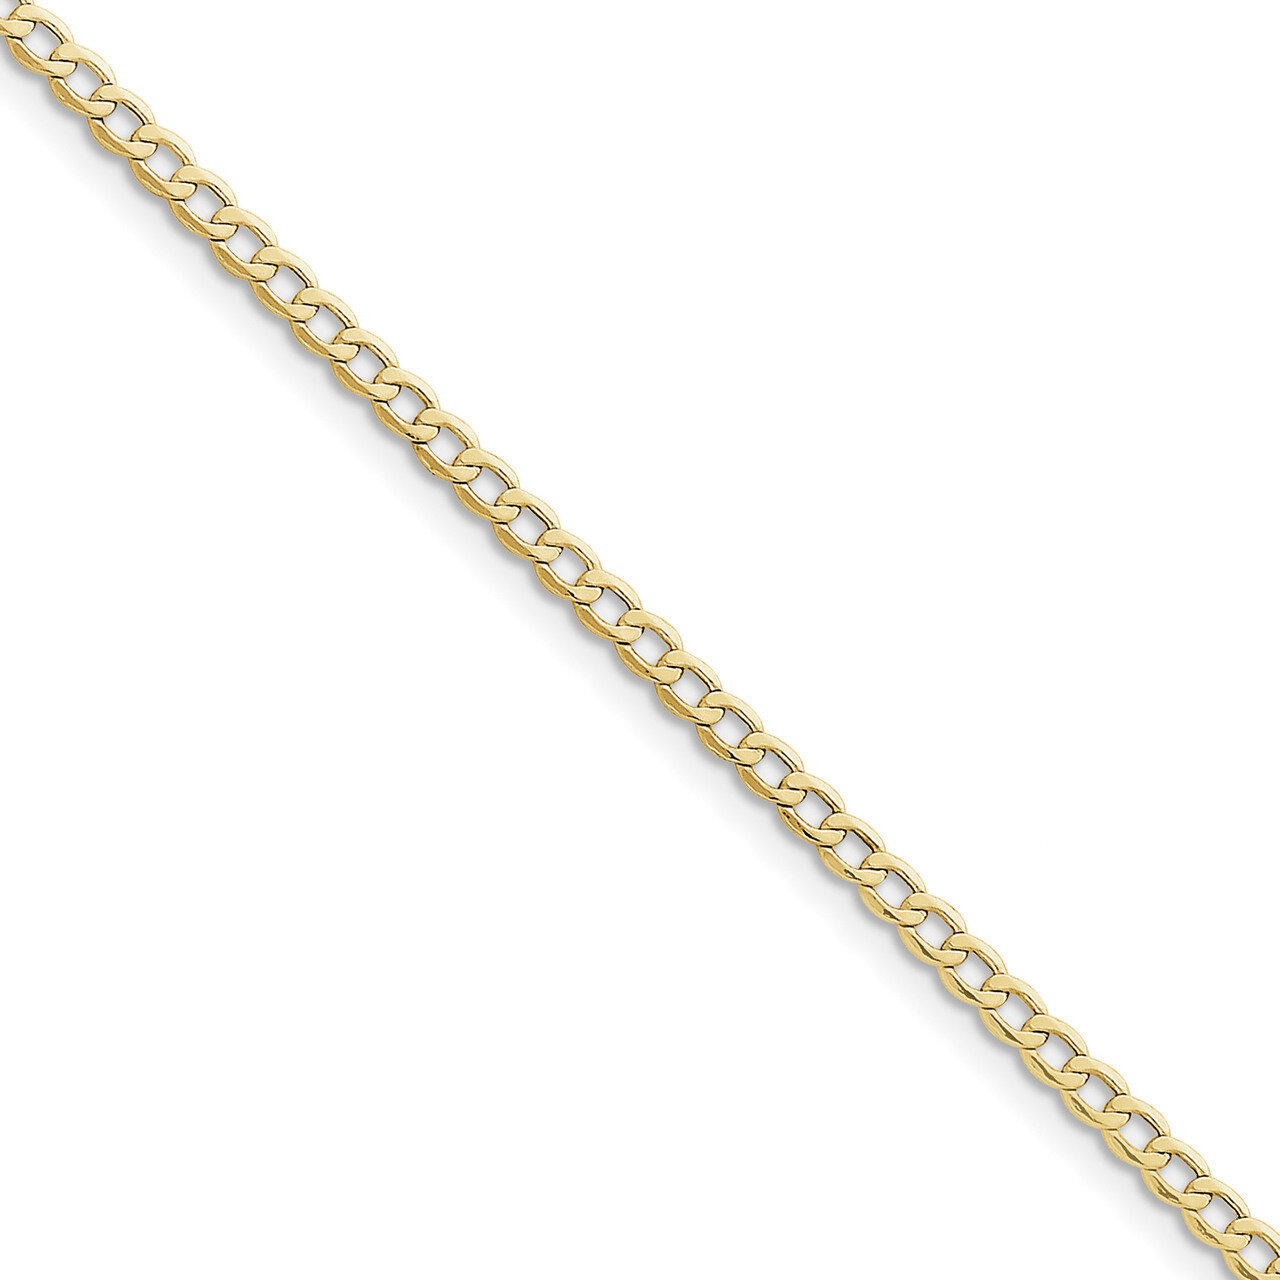 7 Inch 3.35mm Semi-Solid Curb Link Chain 10k Gold 10BC106-7